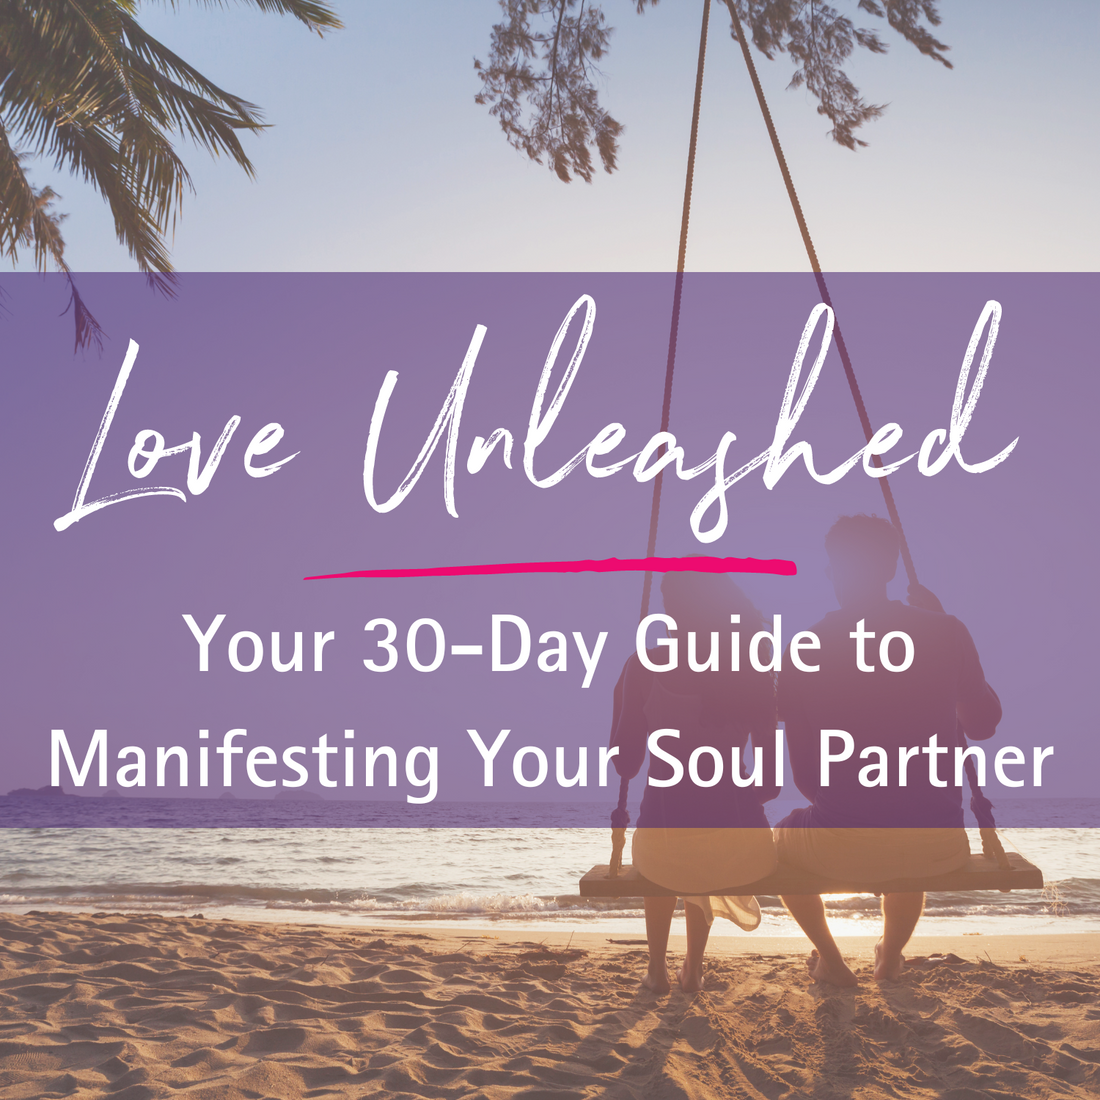 Love Unleashed: Your 30-Day Guide to Manifesting Your Soul Partner